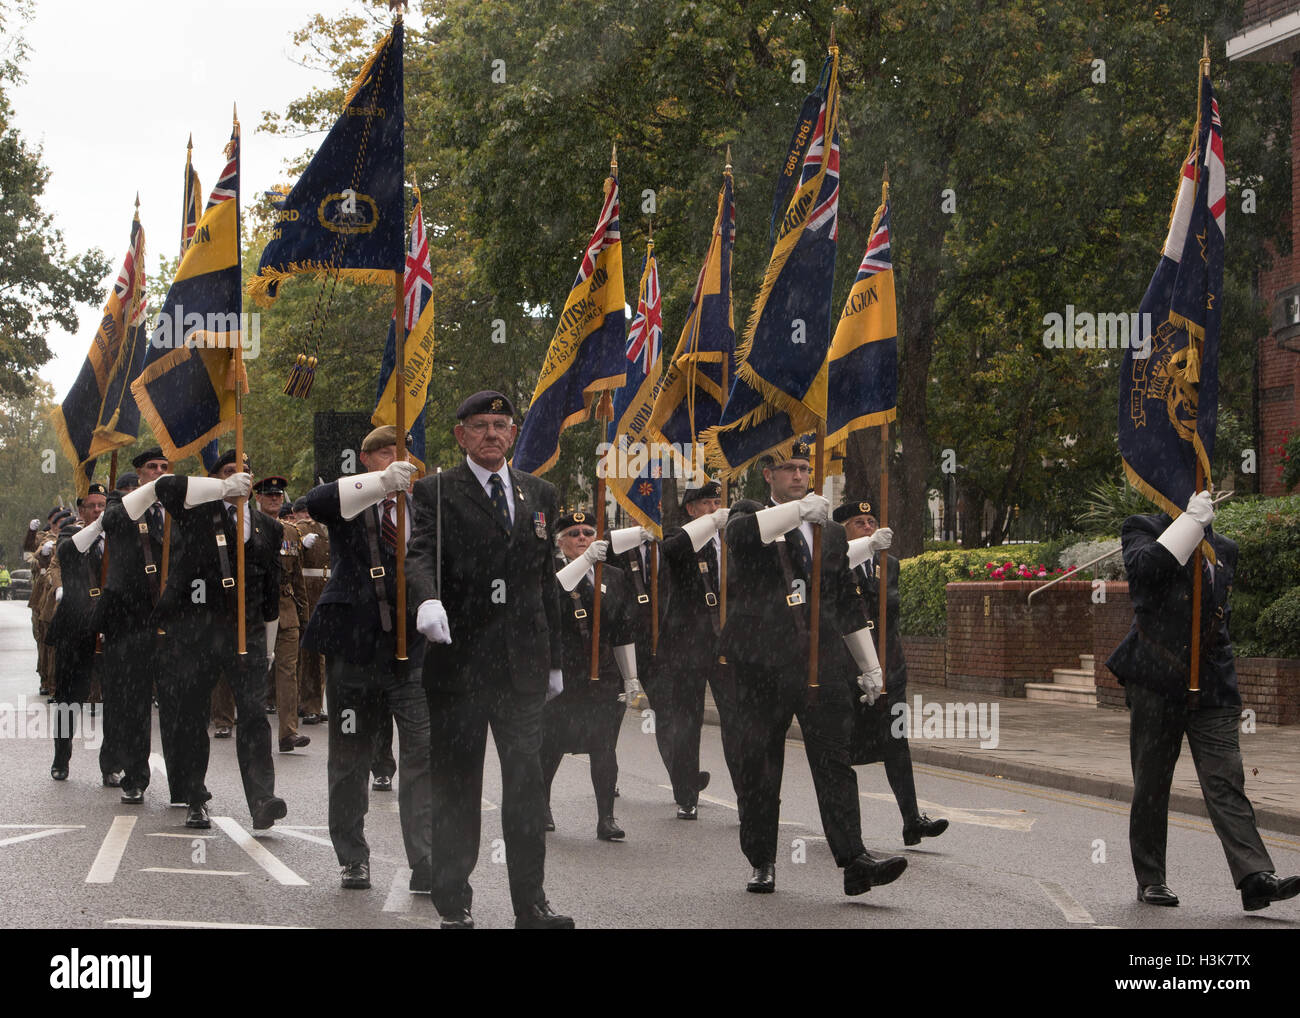 Brentwood, Essex, 9th October 2016, Royal British Legion Standards leads 124 Transport Squadron for a Freedom of Entry march in Brentwood, Essex with heavy rain Credit:  Ian Davidson/Alamy Live News Stock Photo